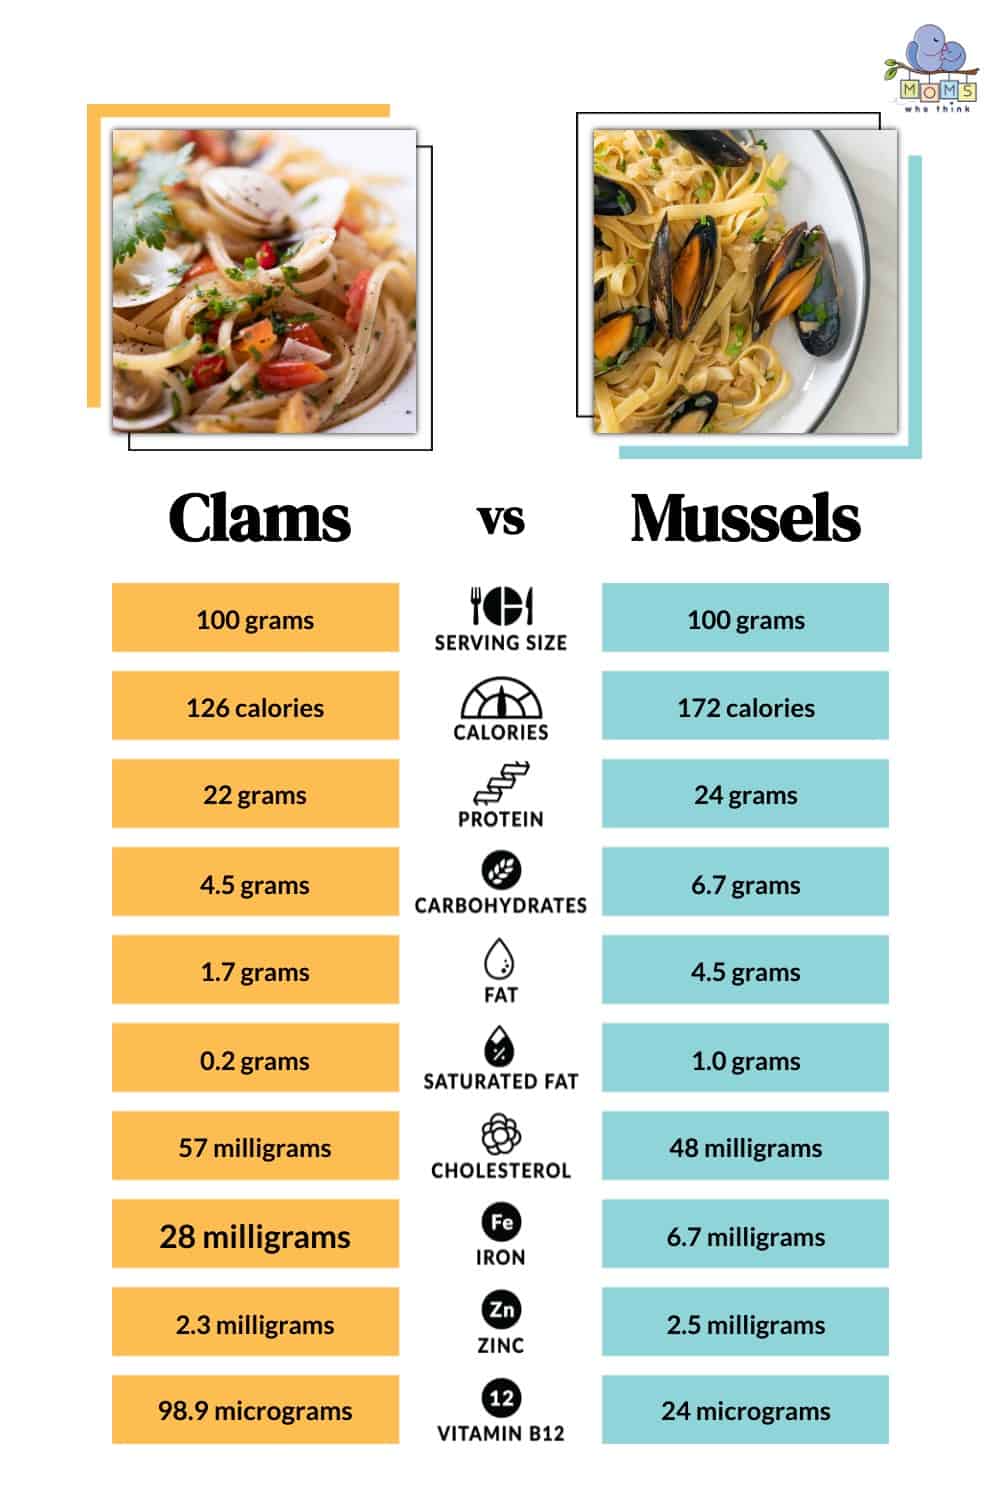 Clams vs Mussels Nutritional Facts